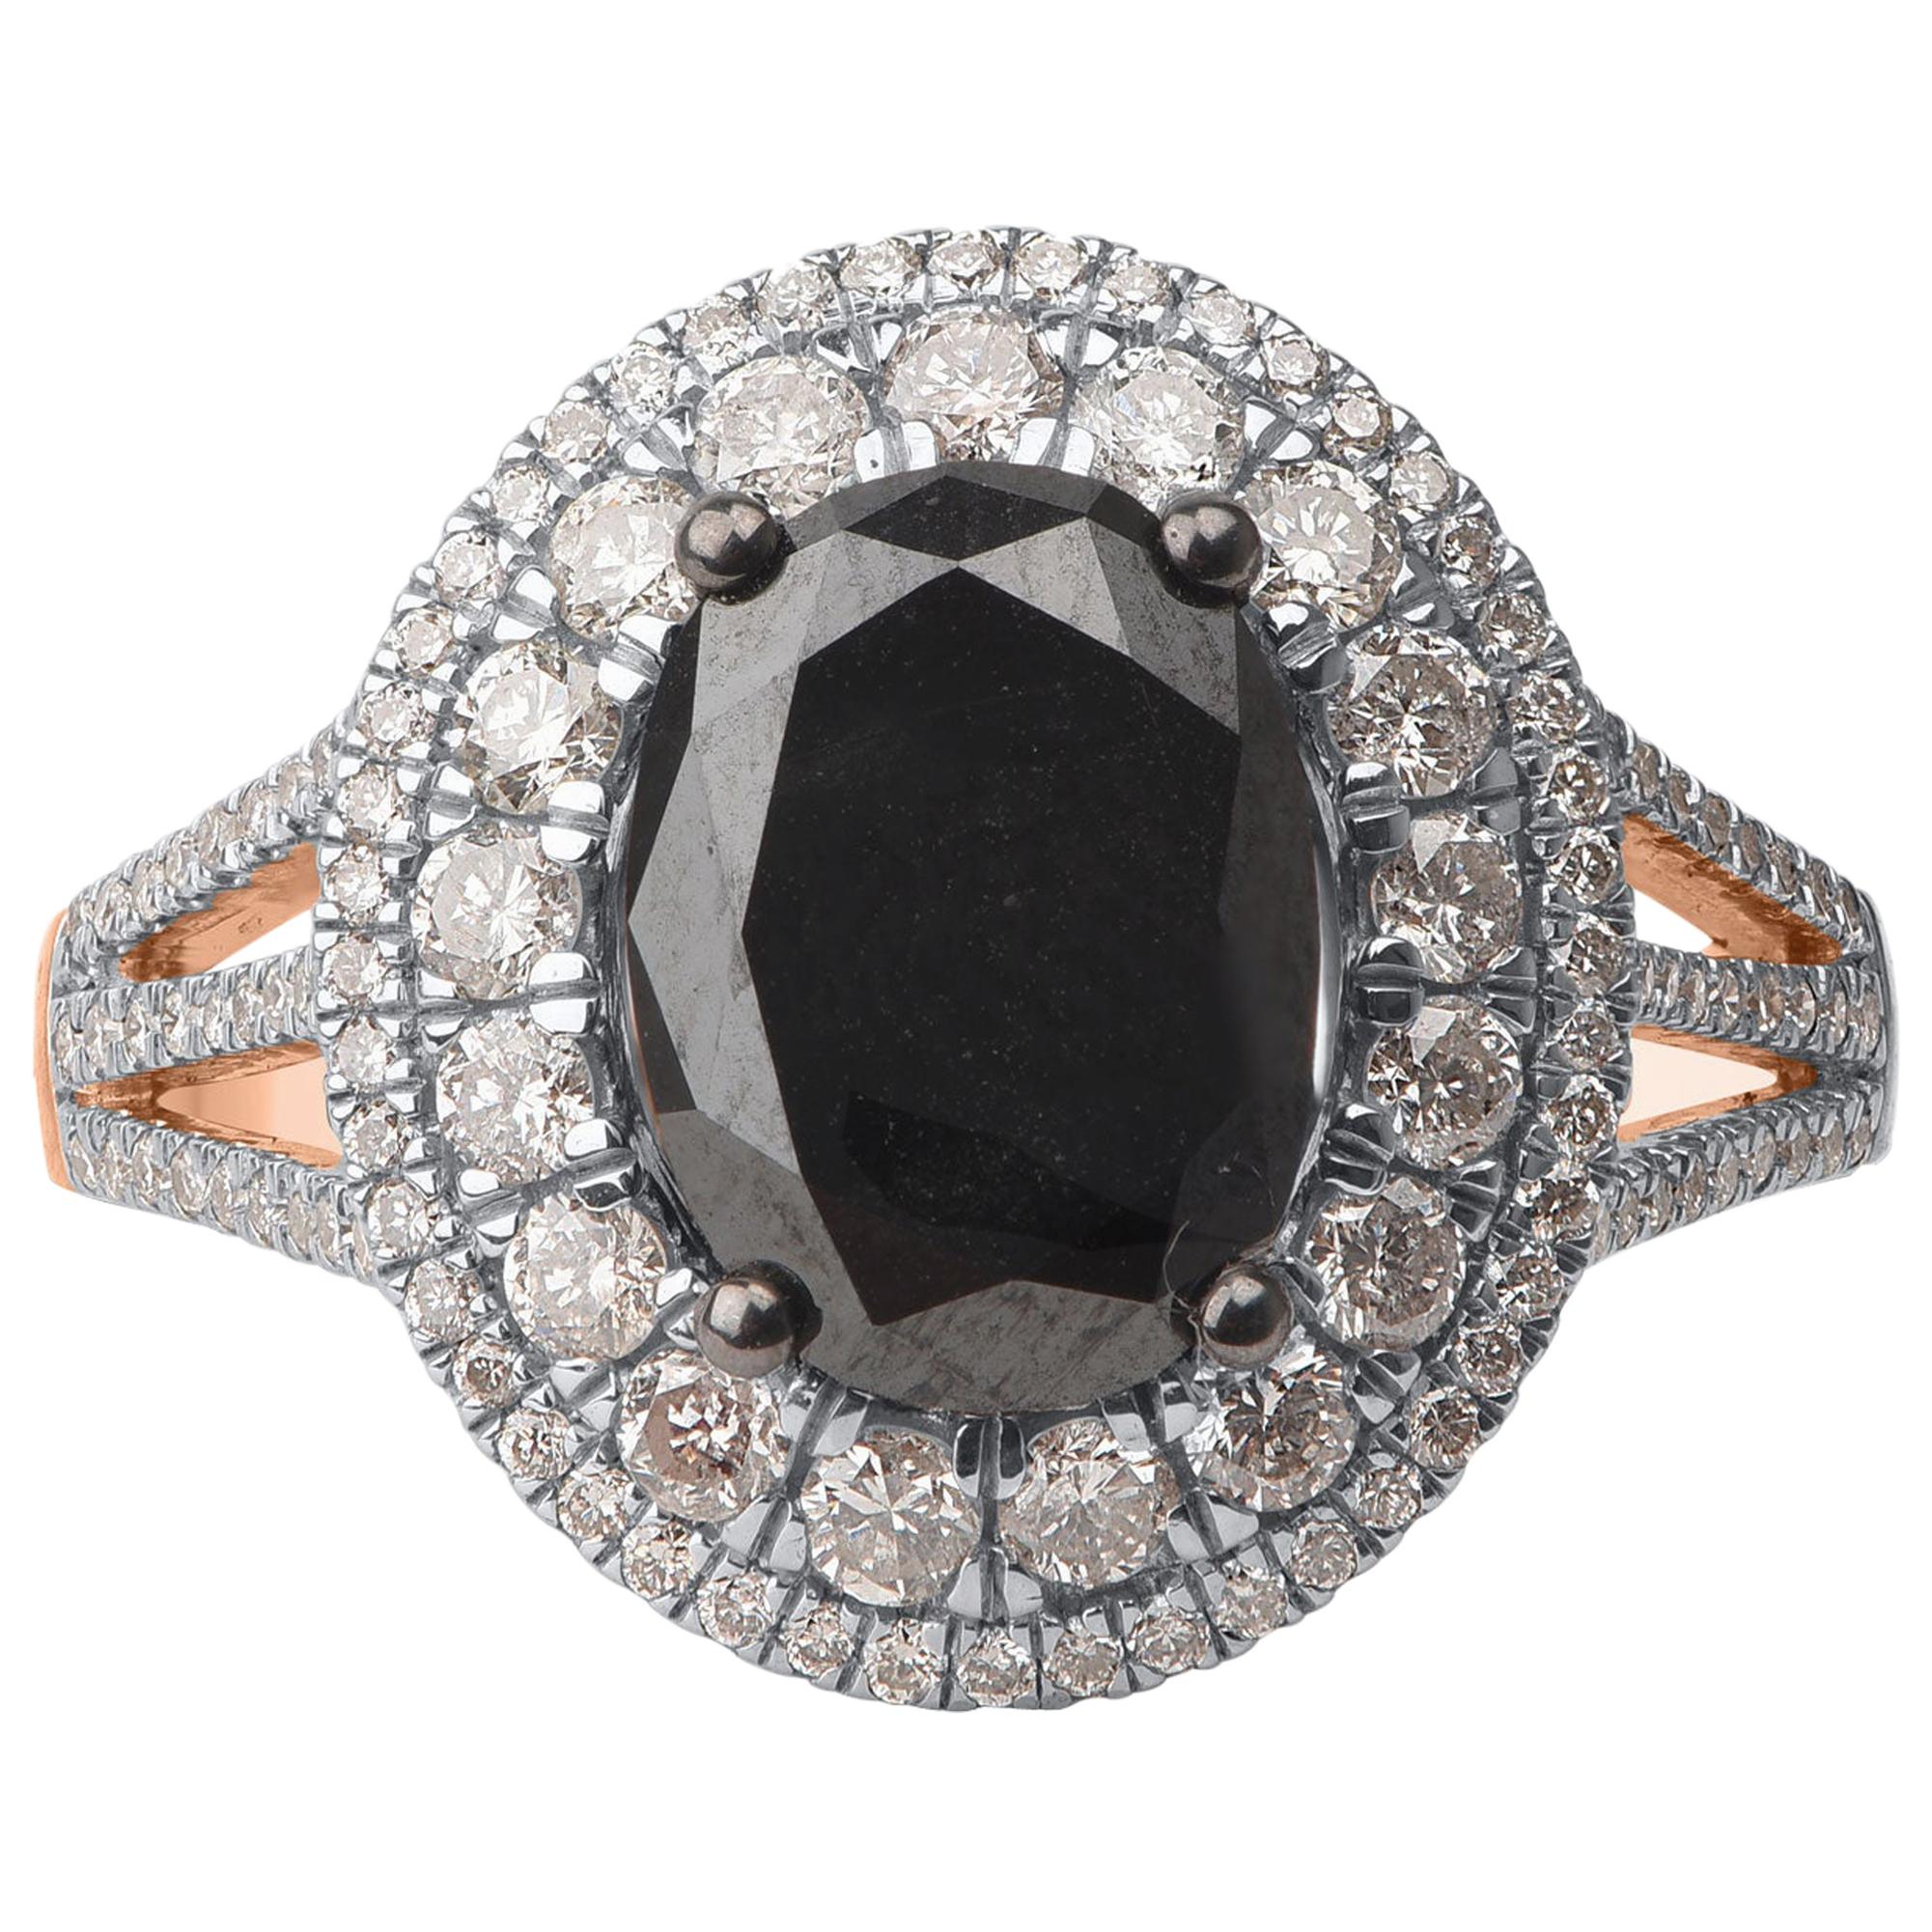 TJD 3 1/2 Carat White and Treated Black Diamond 14 Karat Rose Gold Oval Ring For Sale